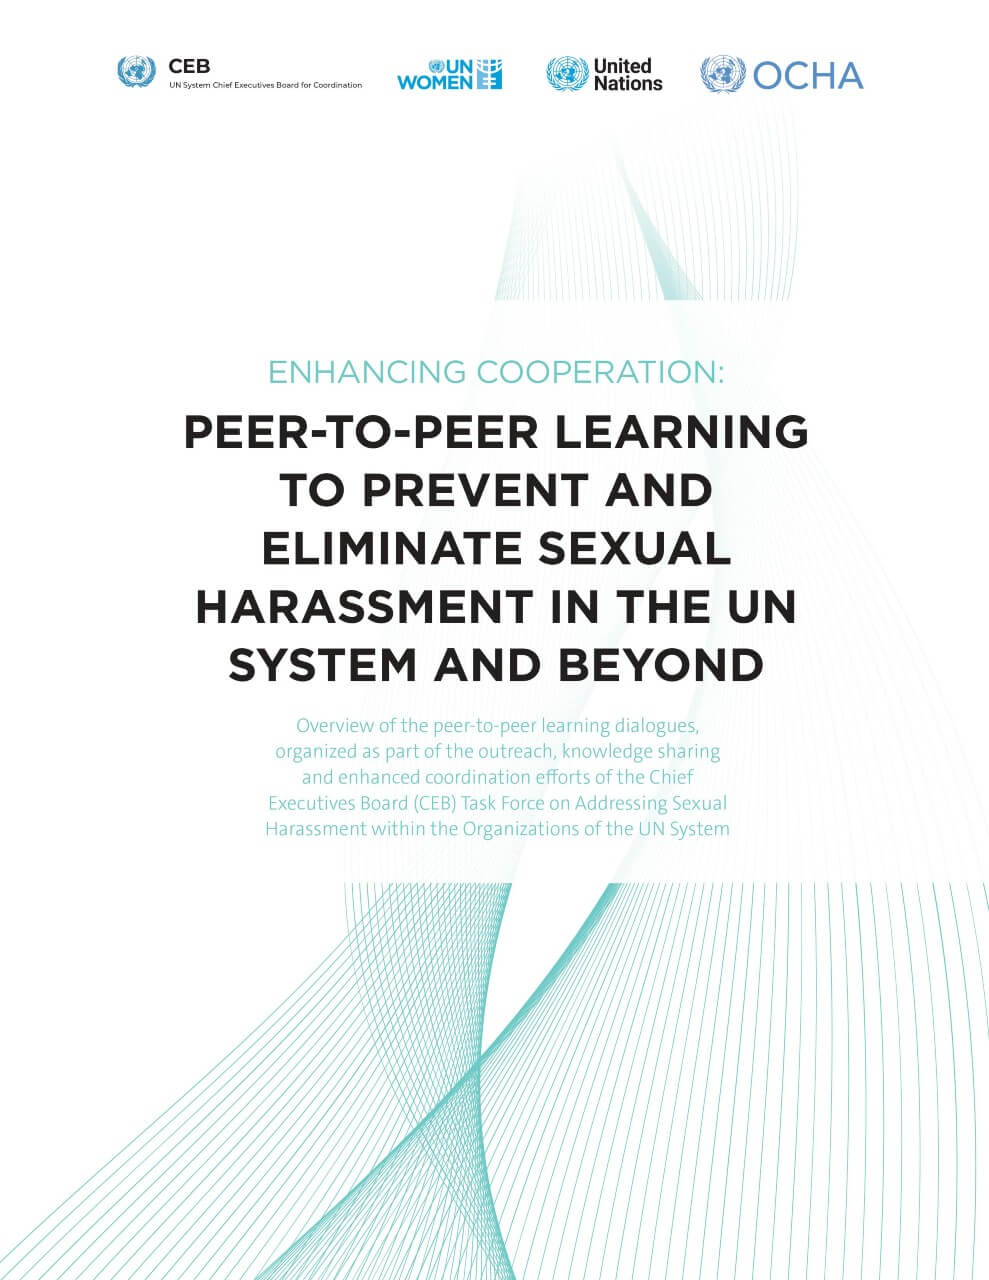 Enhancing cooperation: Peer-to-peer learning to prevent and eliminate sexual harassment in the UN system and beyond